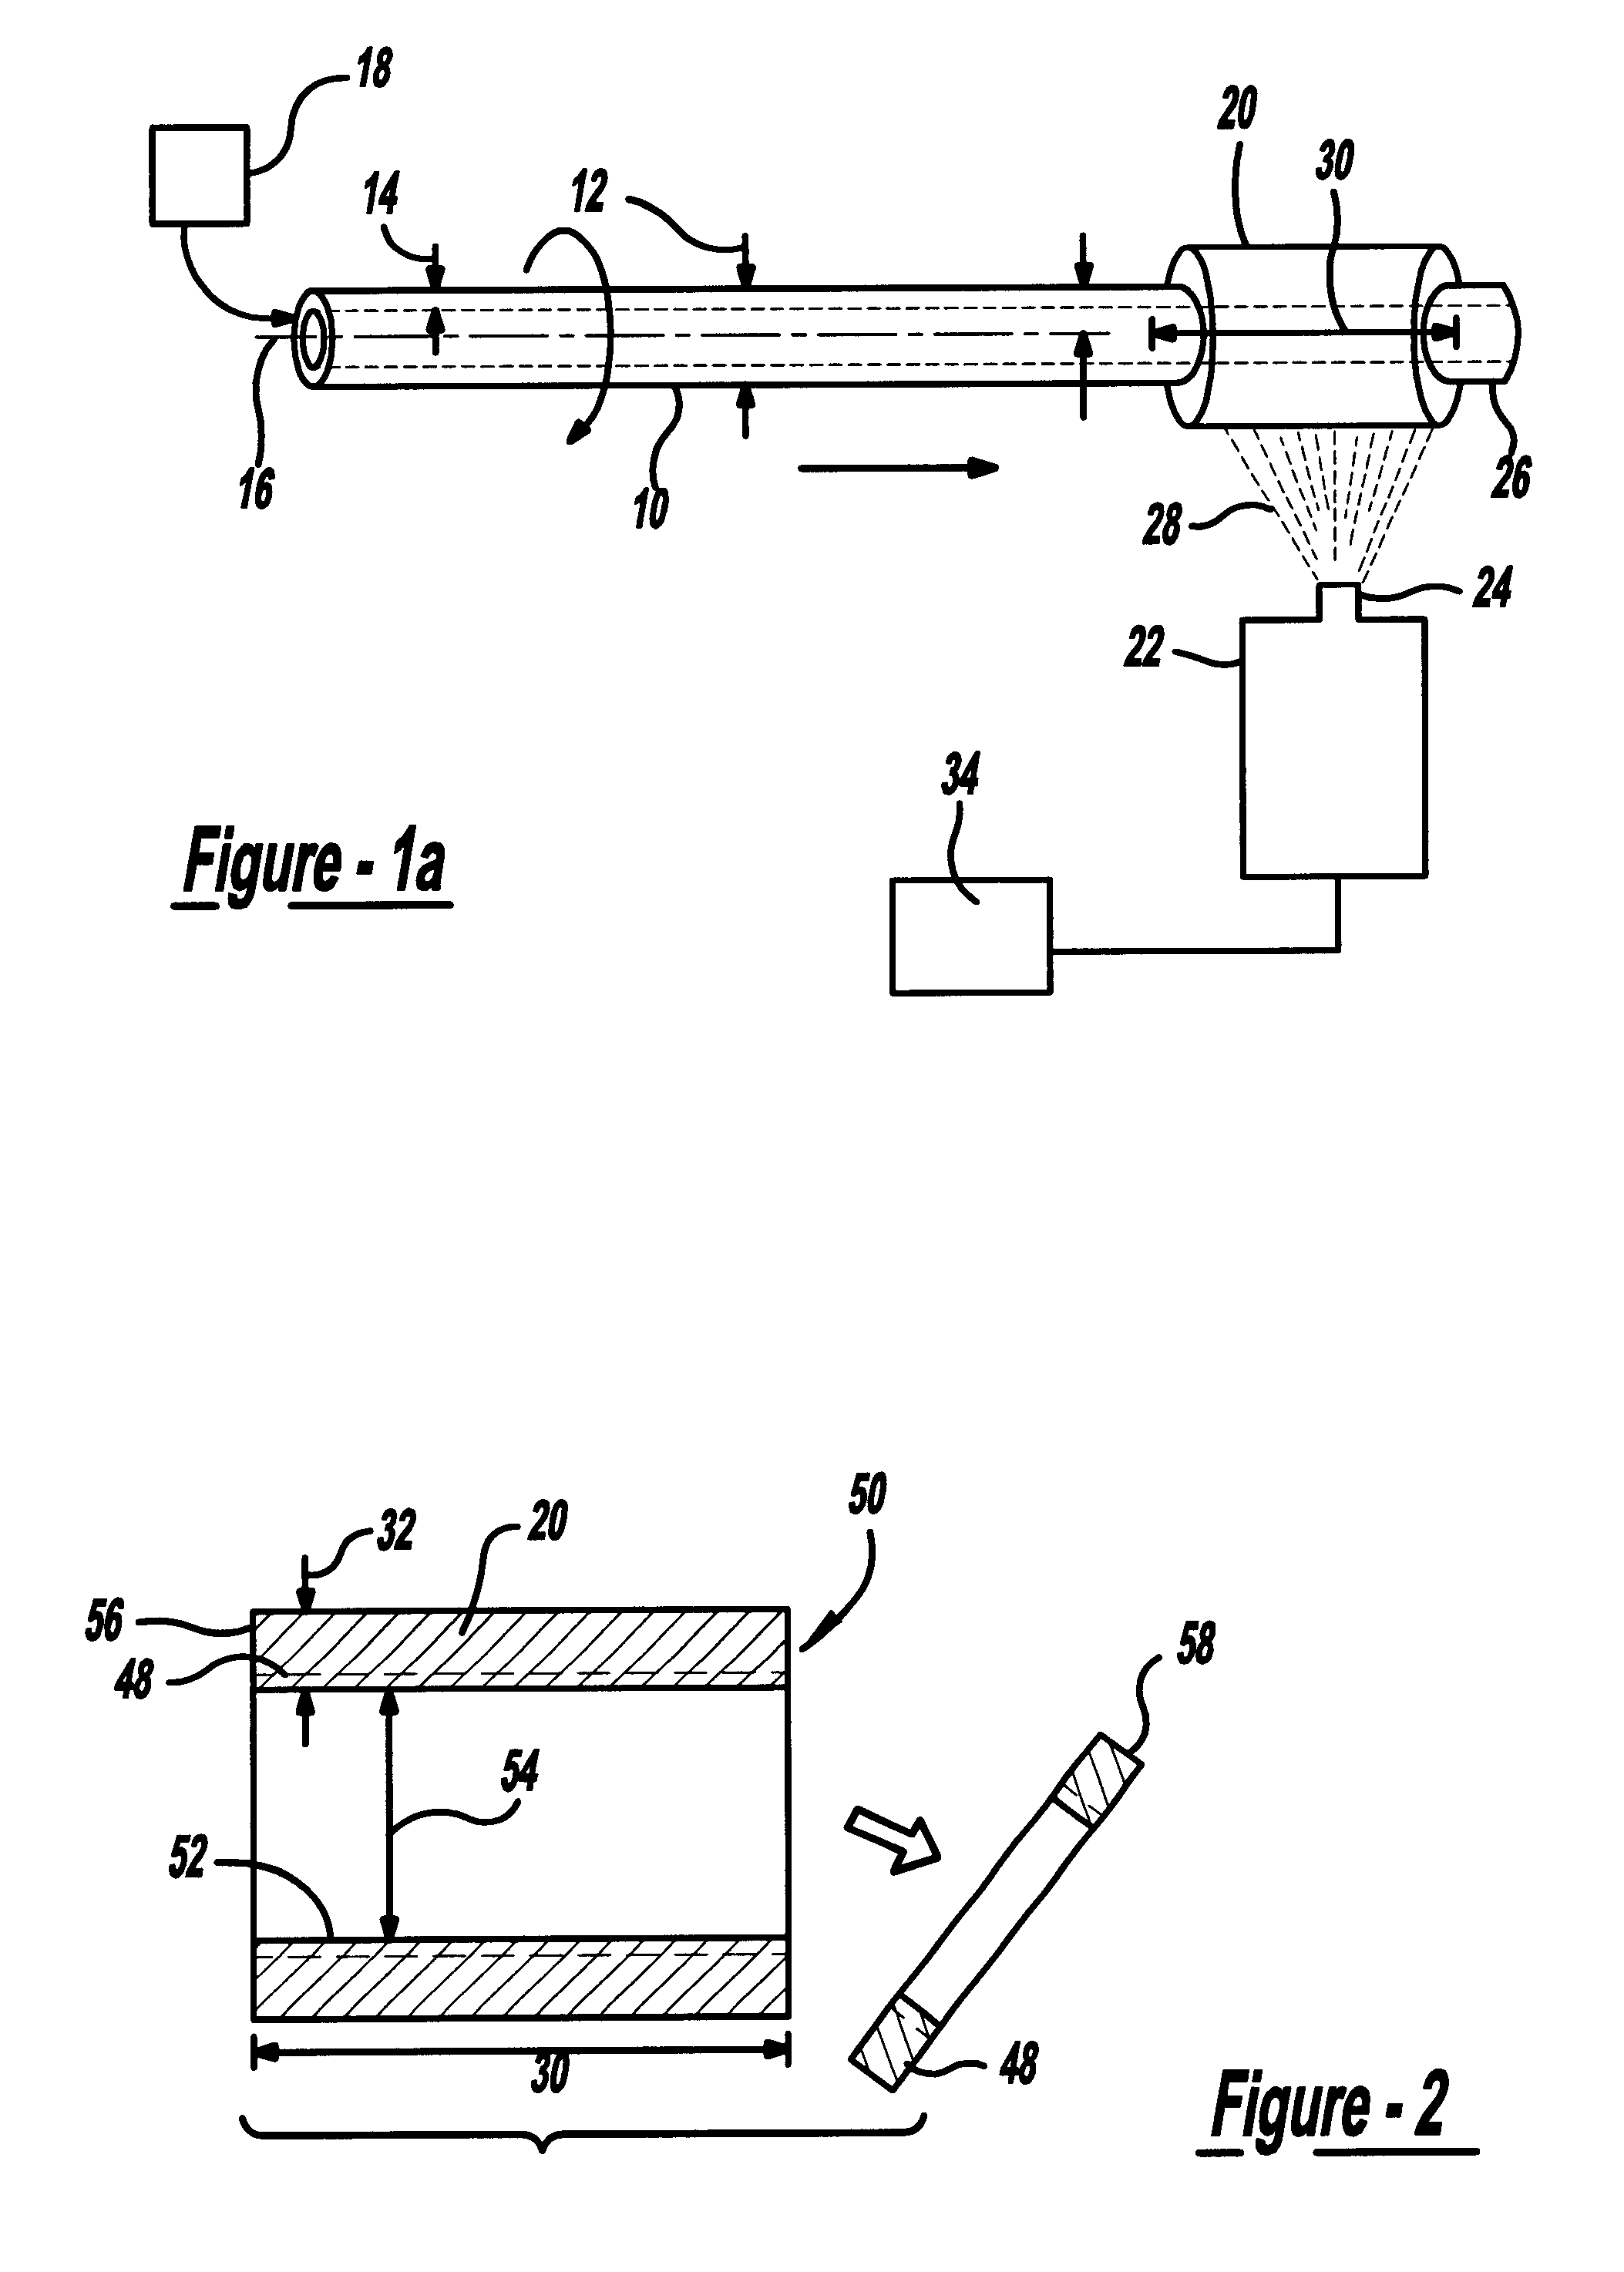 Method of making spray-formed articles using a polymeric mandrel